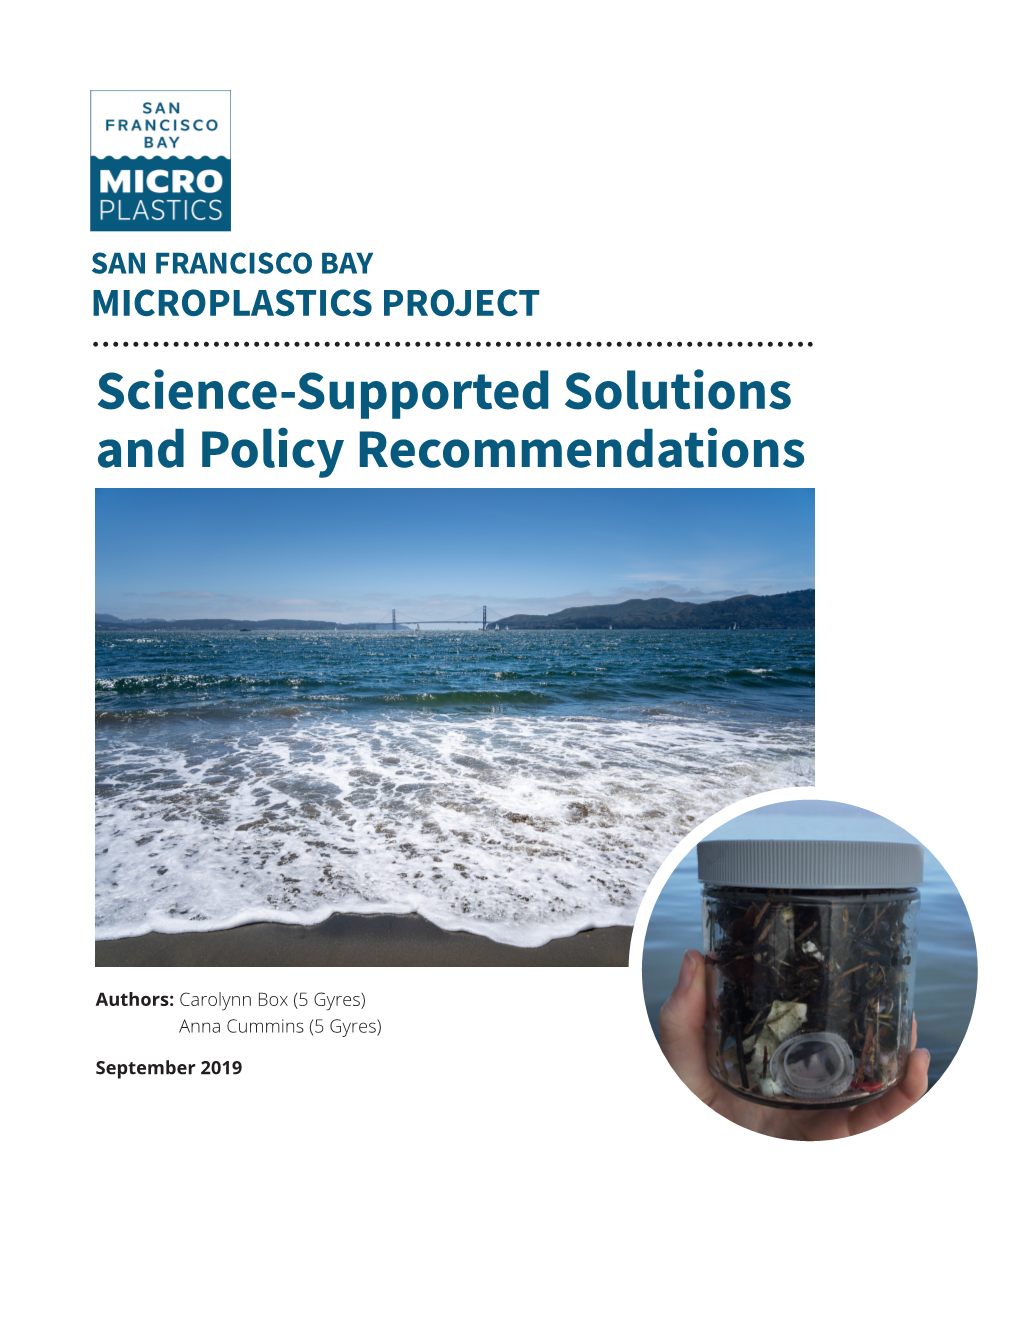 MICROPLASTICS PROJECT Science-Supported Solutions and Policy Recommendations